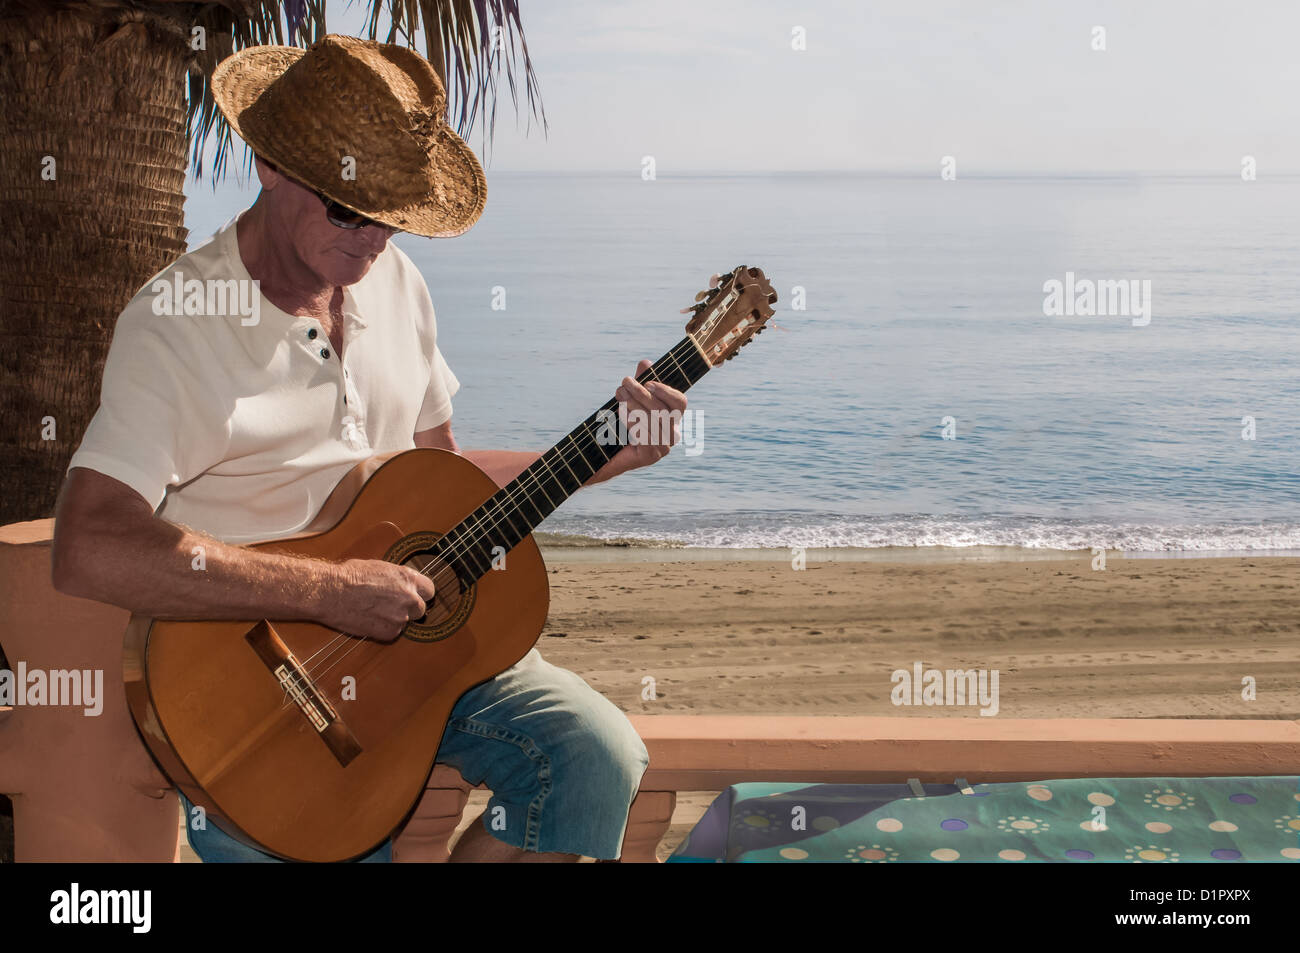 Mature man plays the guitar on the beach of Spain Stock Photo